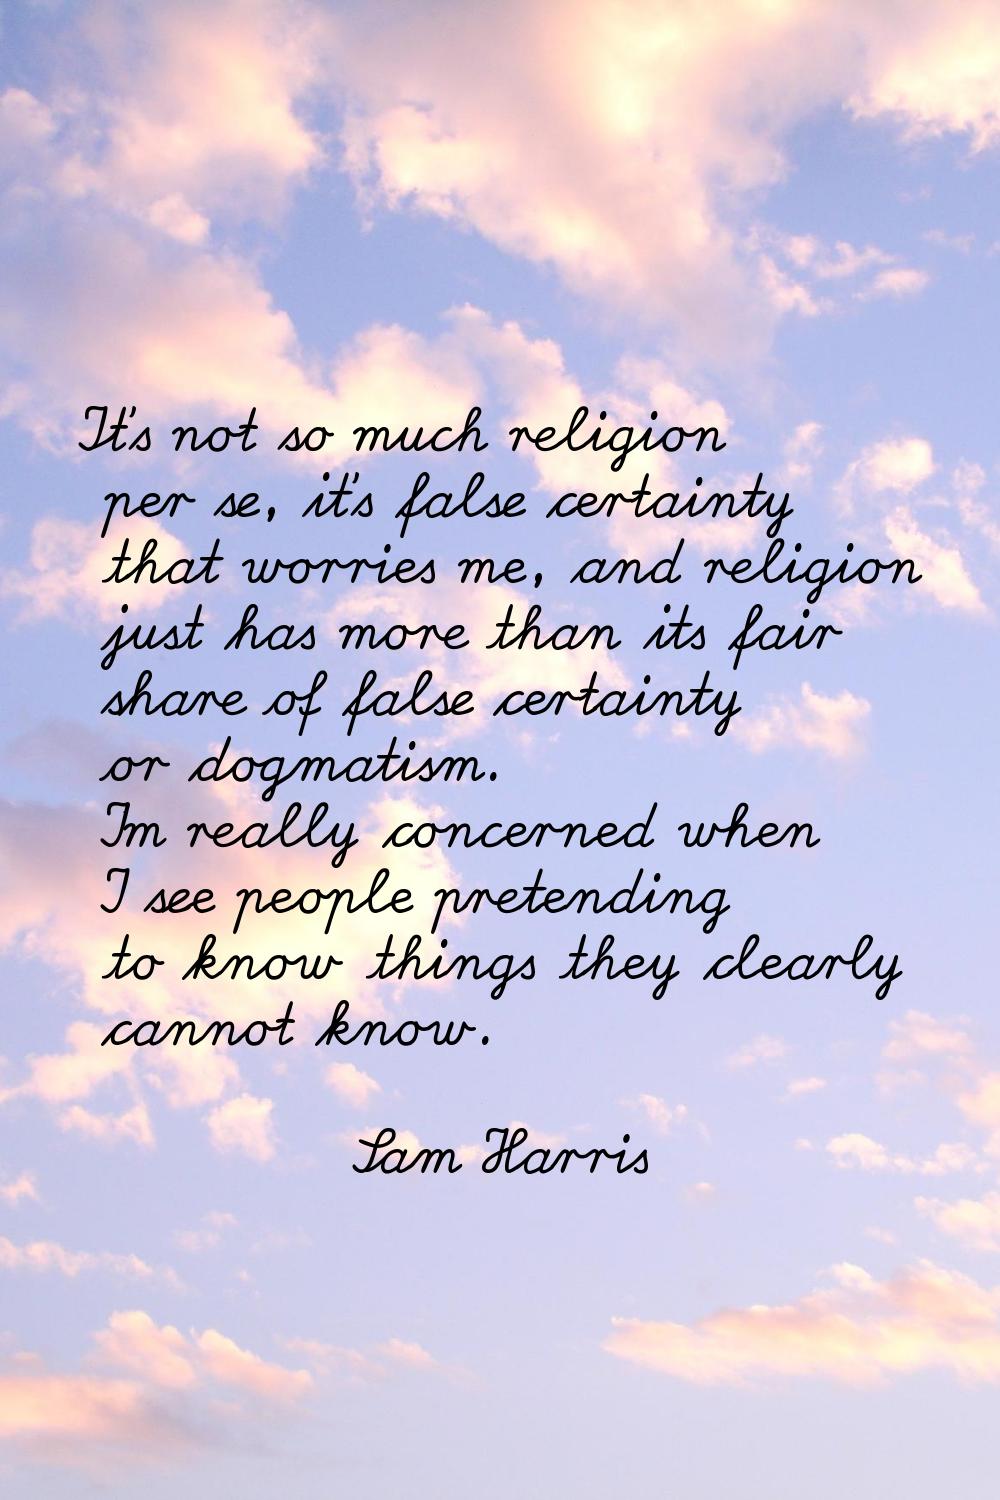 It's not so much religion per se, it's false certainty that worries me, and religion just has more 